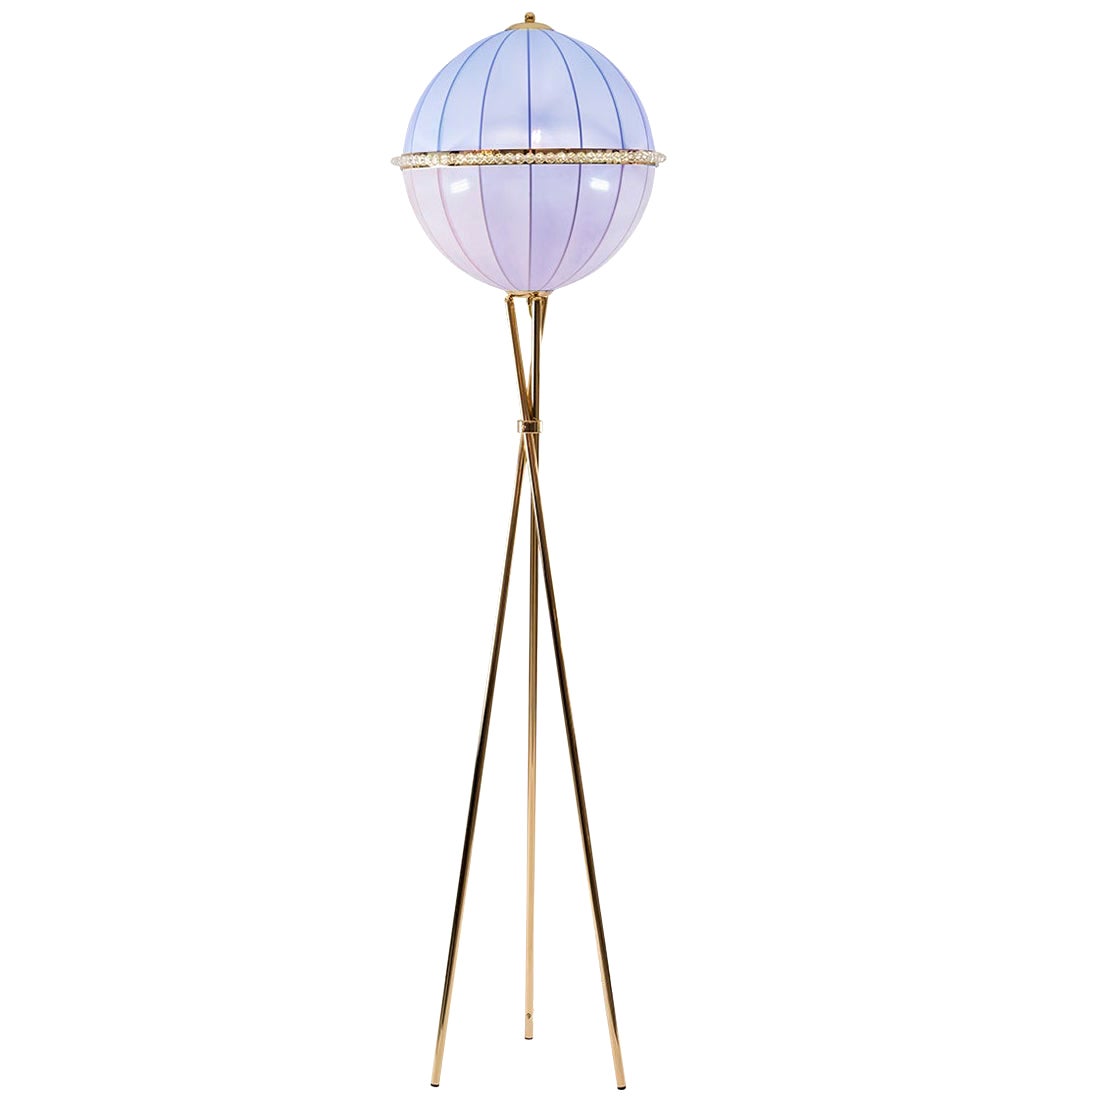 Mid-Century Modern Style Brass Floor Lamp "Quoluna" with Fabric Shade Re Edition For Sale